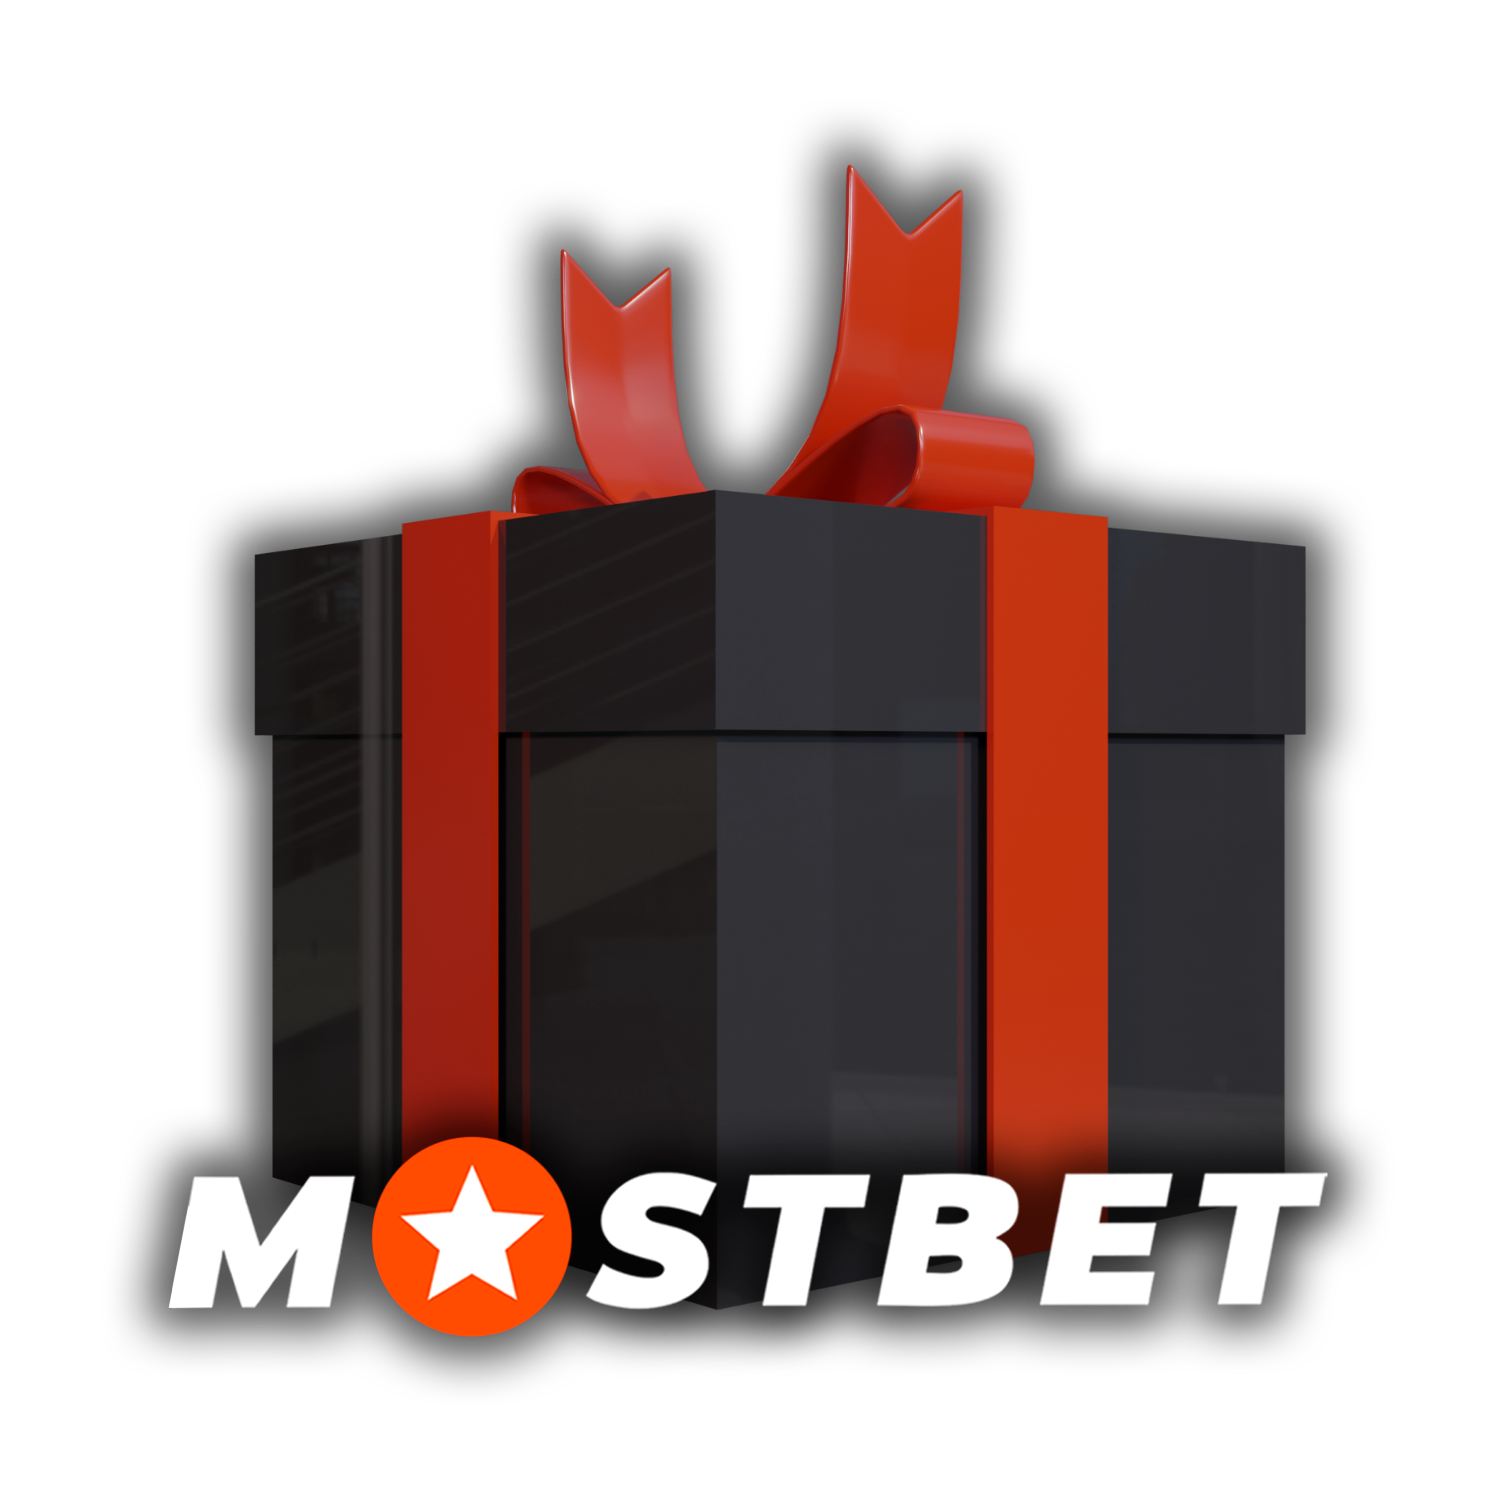 Find out how to get a Mostbet bonus and spend it on sports betting.